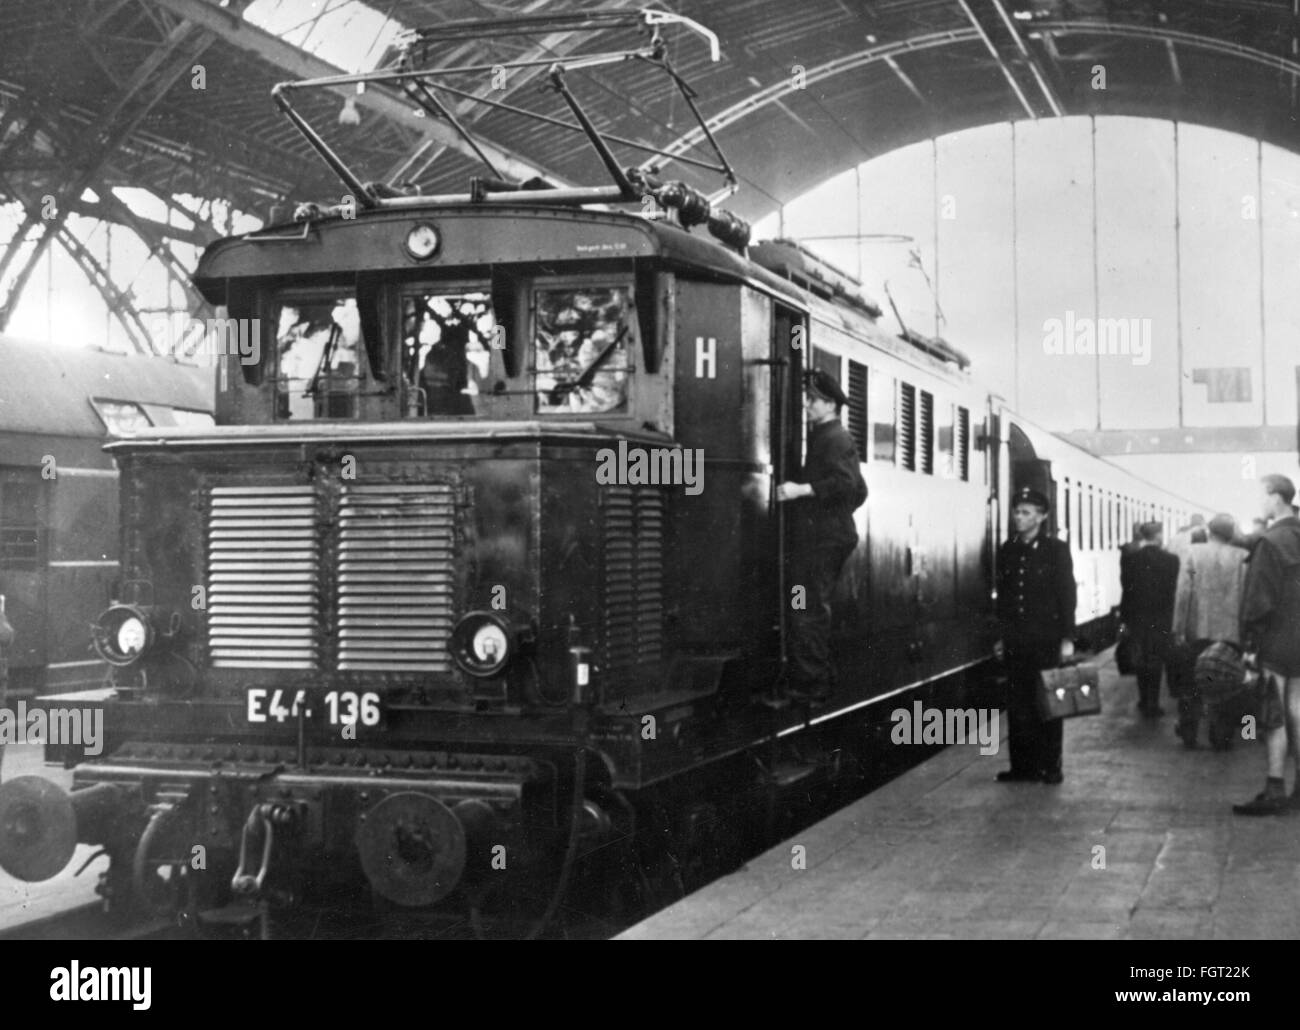 transport / transportation,railway,locomotives,electric locomotive,East German Railways,series E 44,after the first ride on the new electrified route from Bitterfeld to Leipzig,central station Leipzig,5.6.1958,loco,electric locomotive,E44,E-44,platform,platforms,staff engine driver,current collector,current collectors,electrification,fulfillment of the five-year plan,technics,technology,technologies,Saxony,Deutsche Reichsbahn,East-Germany,GDR,DDR,East Germany,Eastern Germany,Germany,1950s,50s,20th century,people,transport,tra,Additional-Rights-Clearences-Not Available Stock Photo